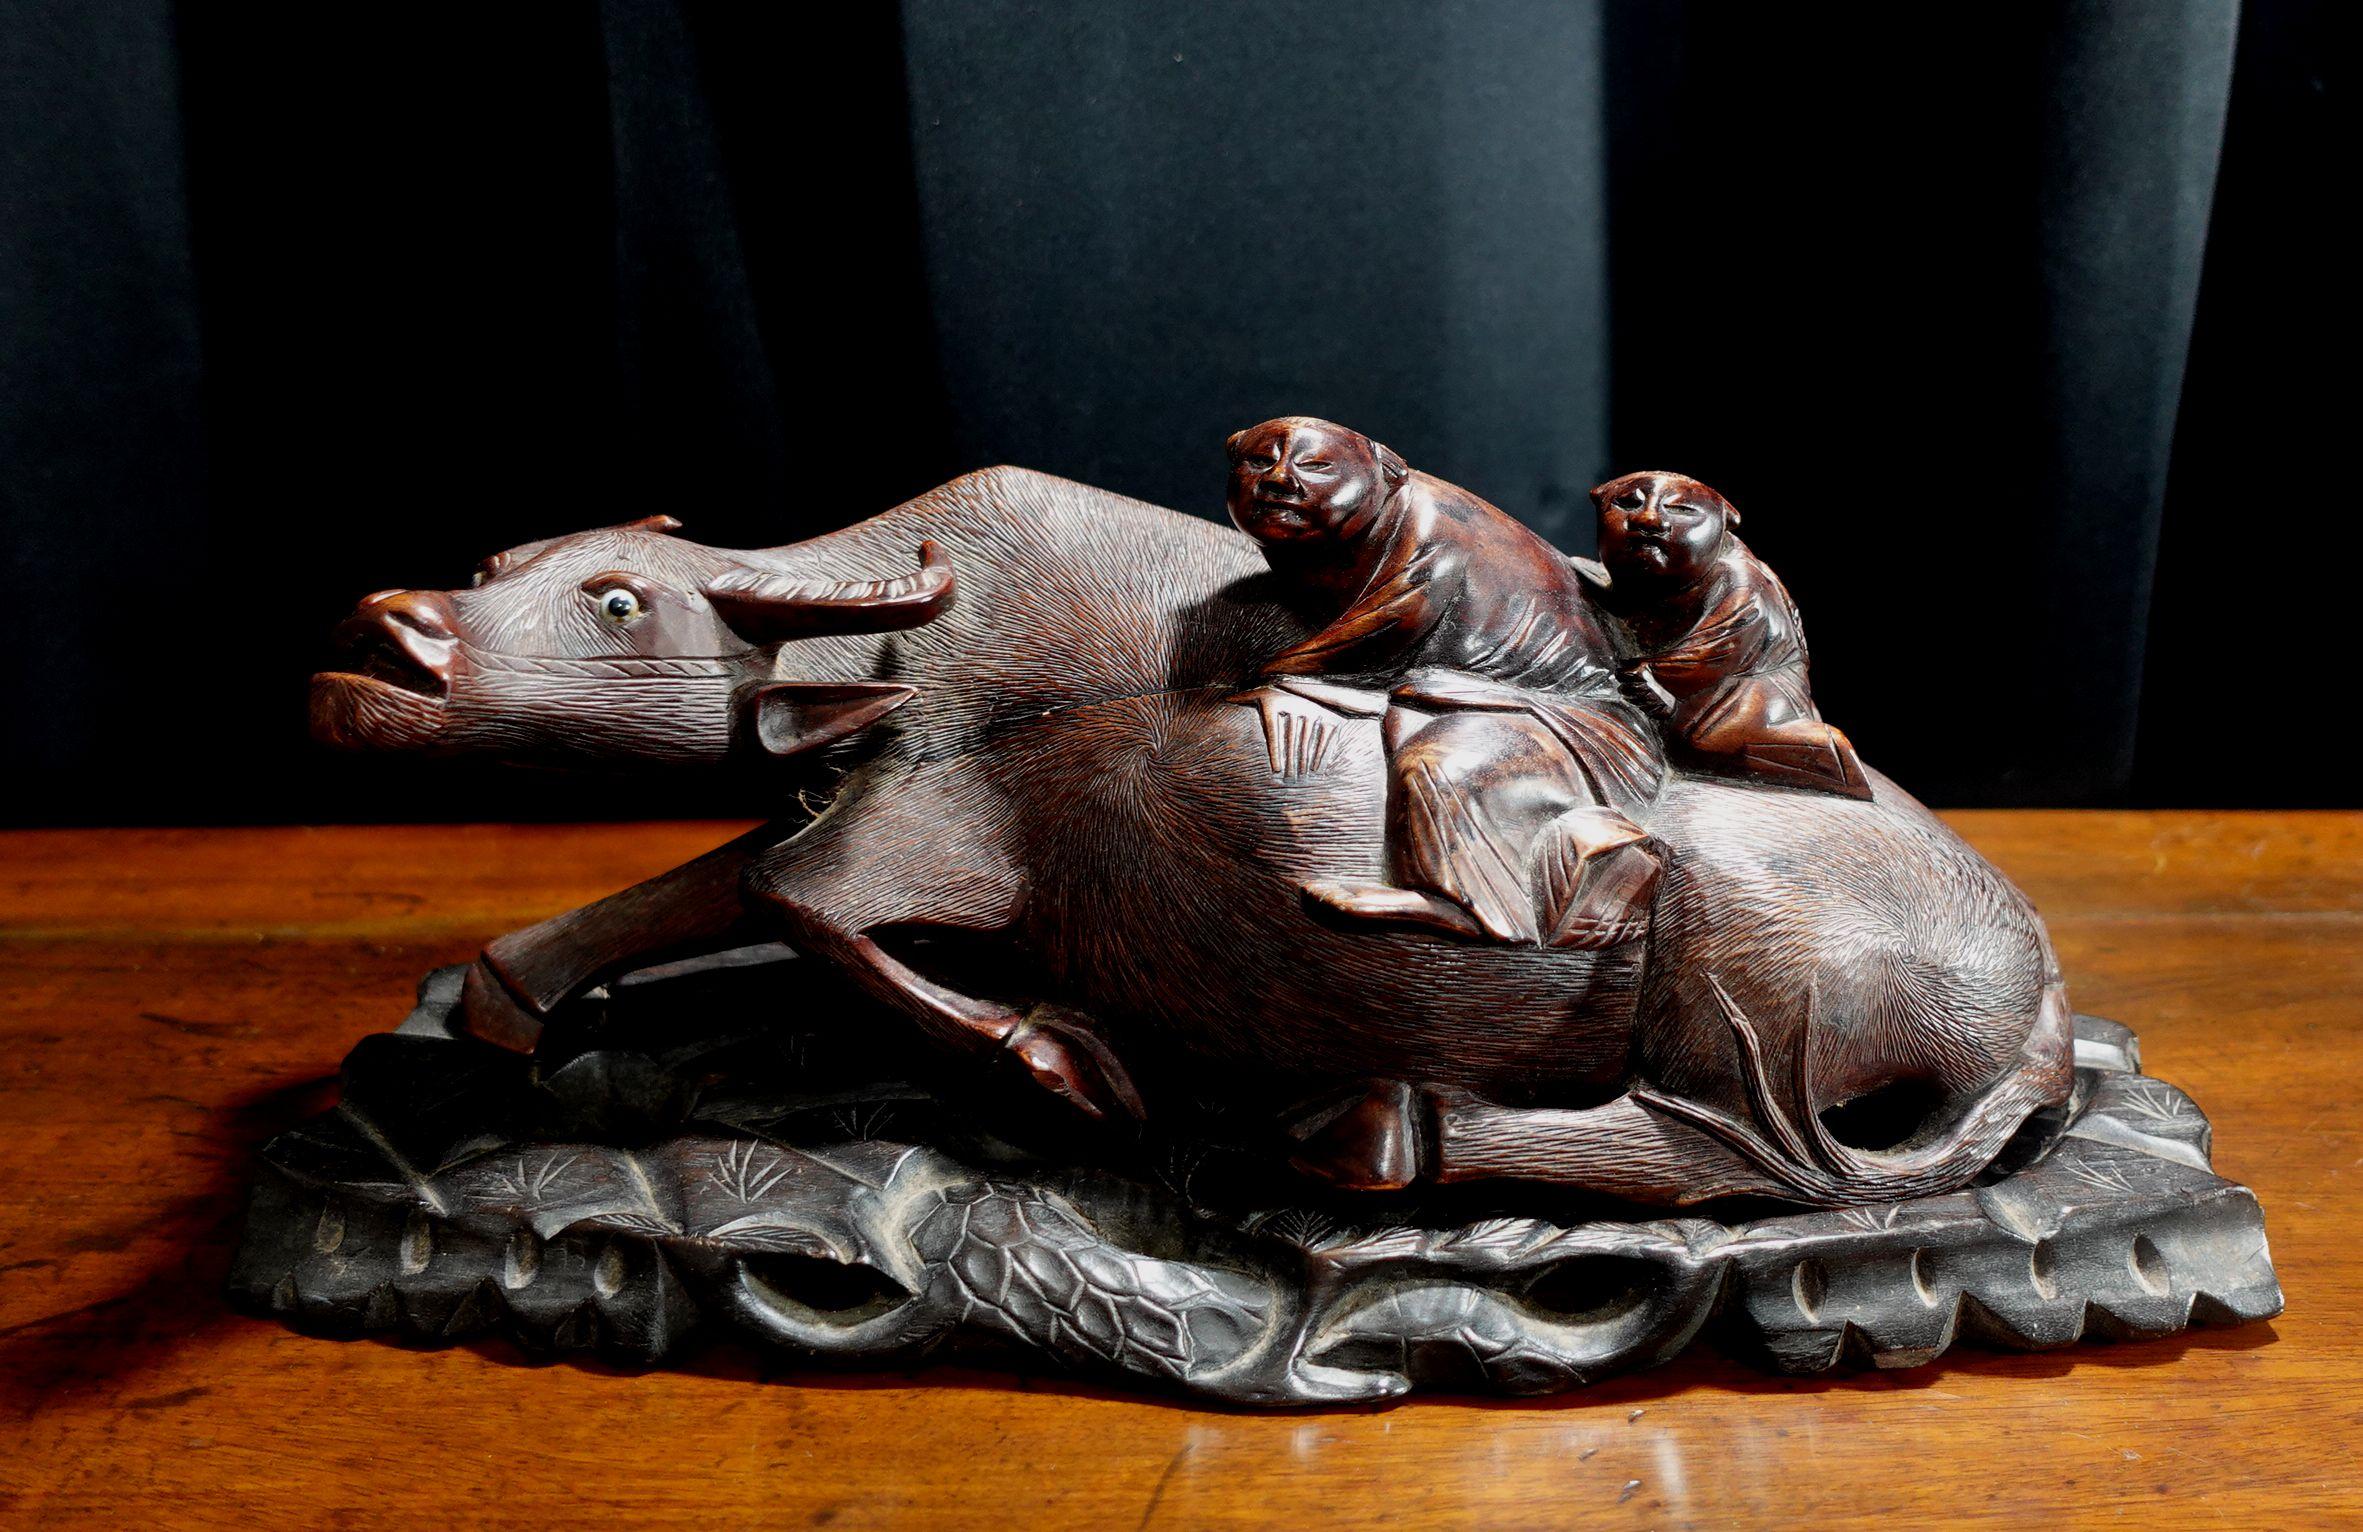 A hand-carved of hardwood, water buffalo, and boys from Japan, depicting two boys seating on the Buffalo back.
The intricated carved on the body of the buffalo presents countless hair, supper quality. The fitted base is also made from hardwood in a